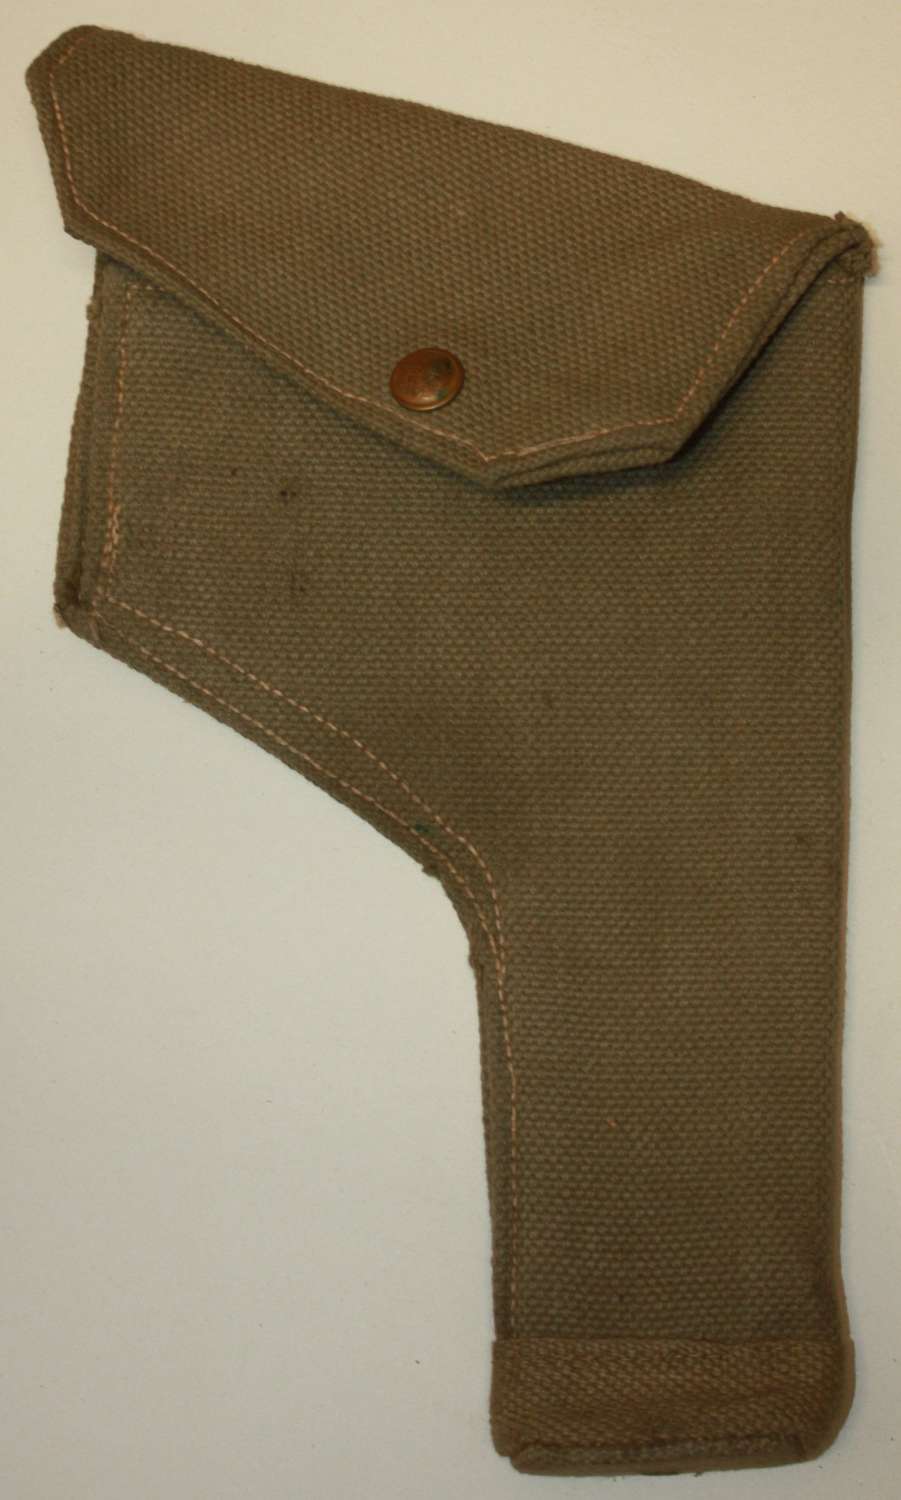 A WWII INDIAN MADE 37 PATTERN PISTOL HOLSTER 1942 DATED